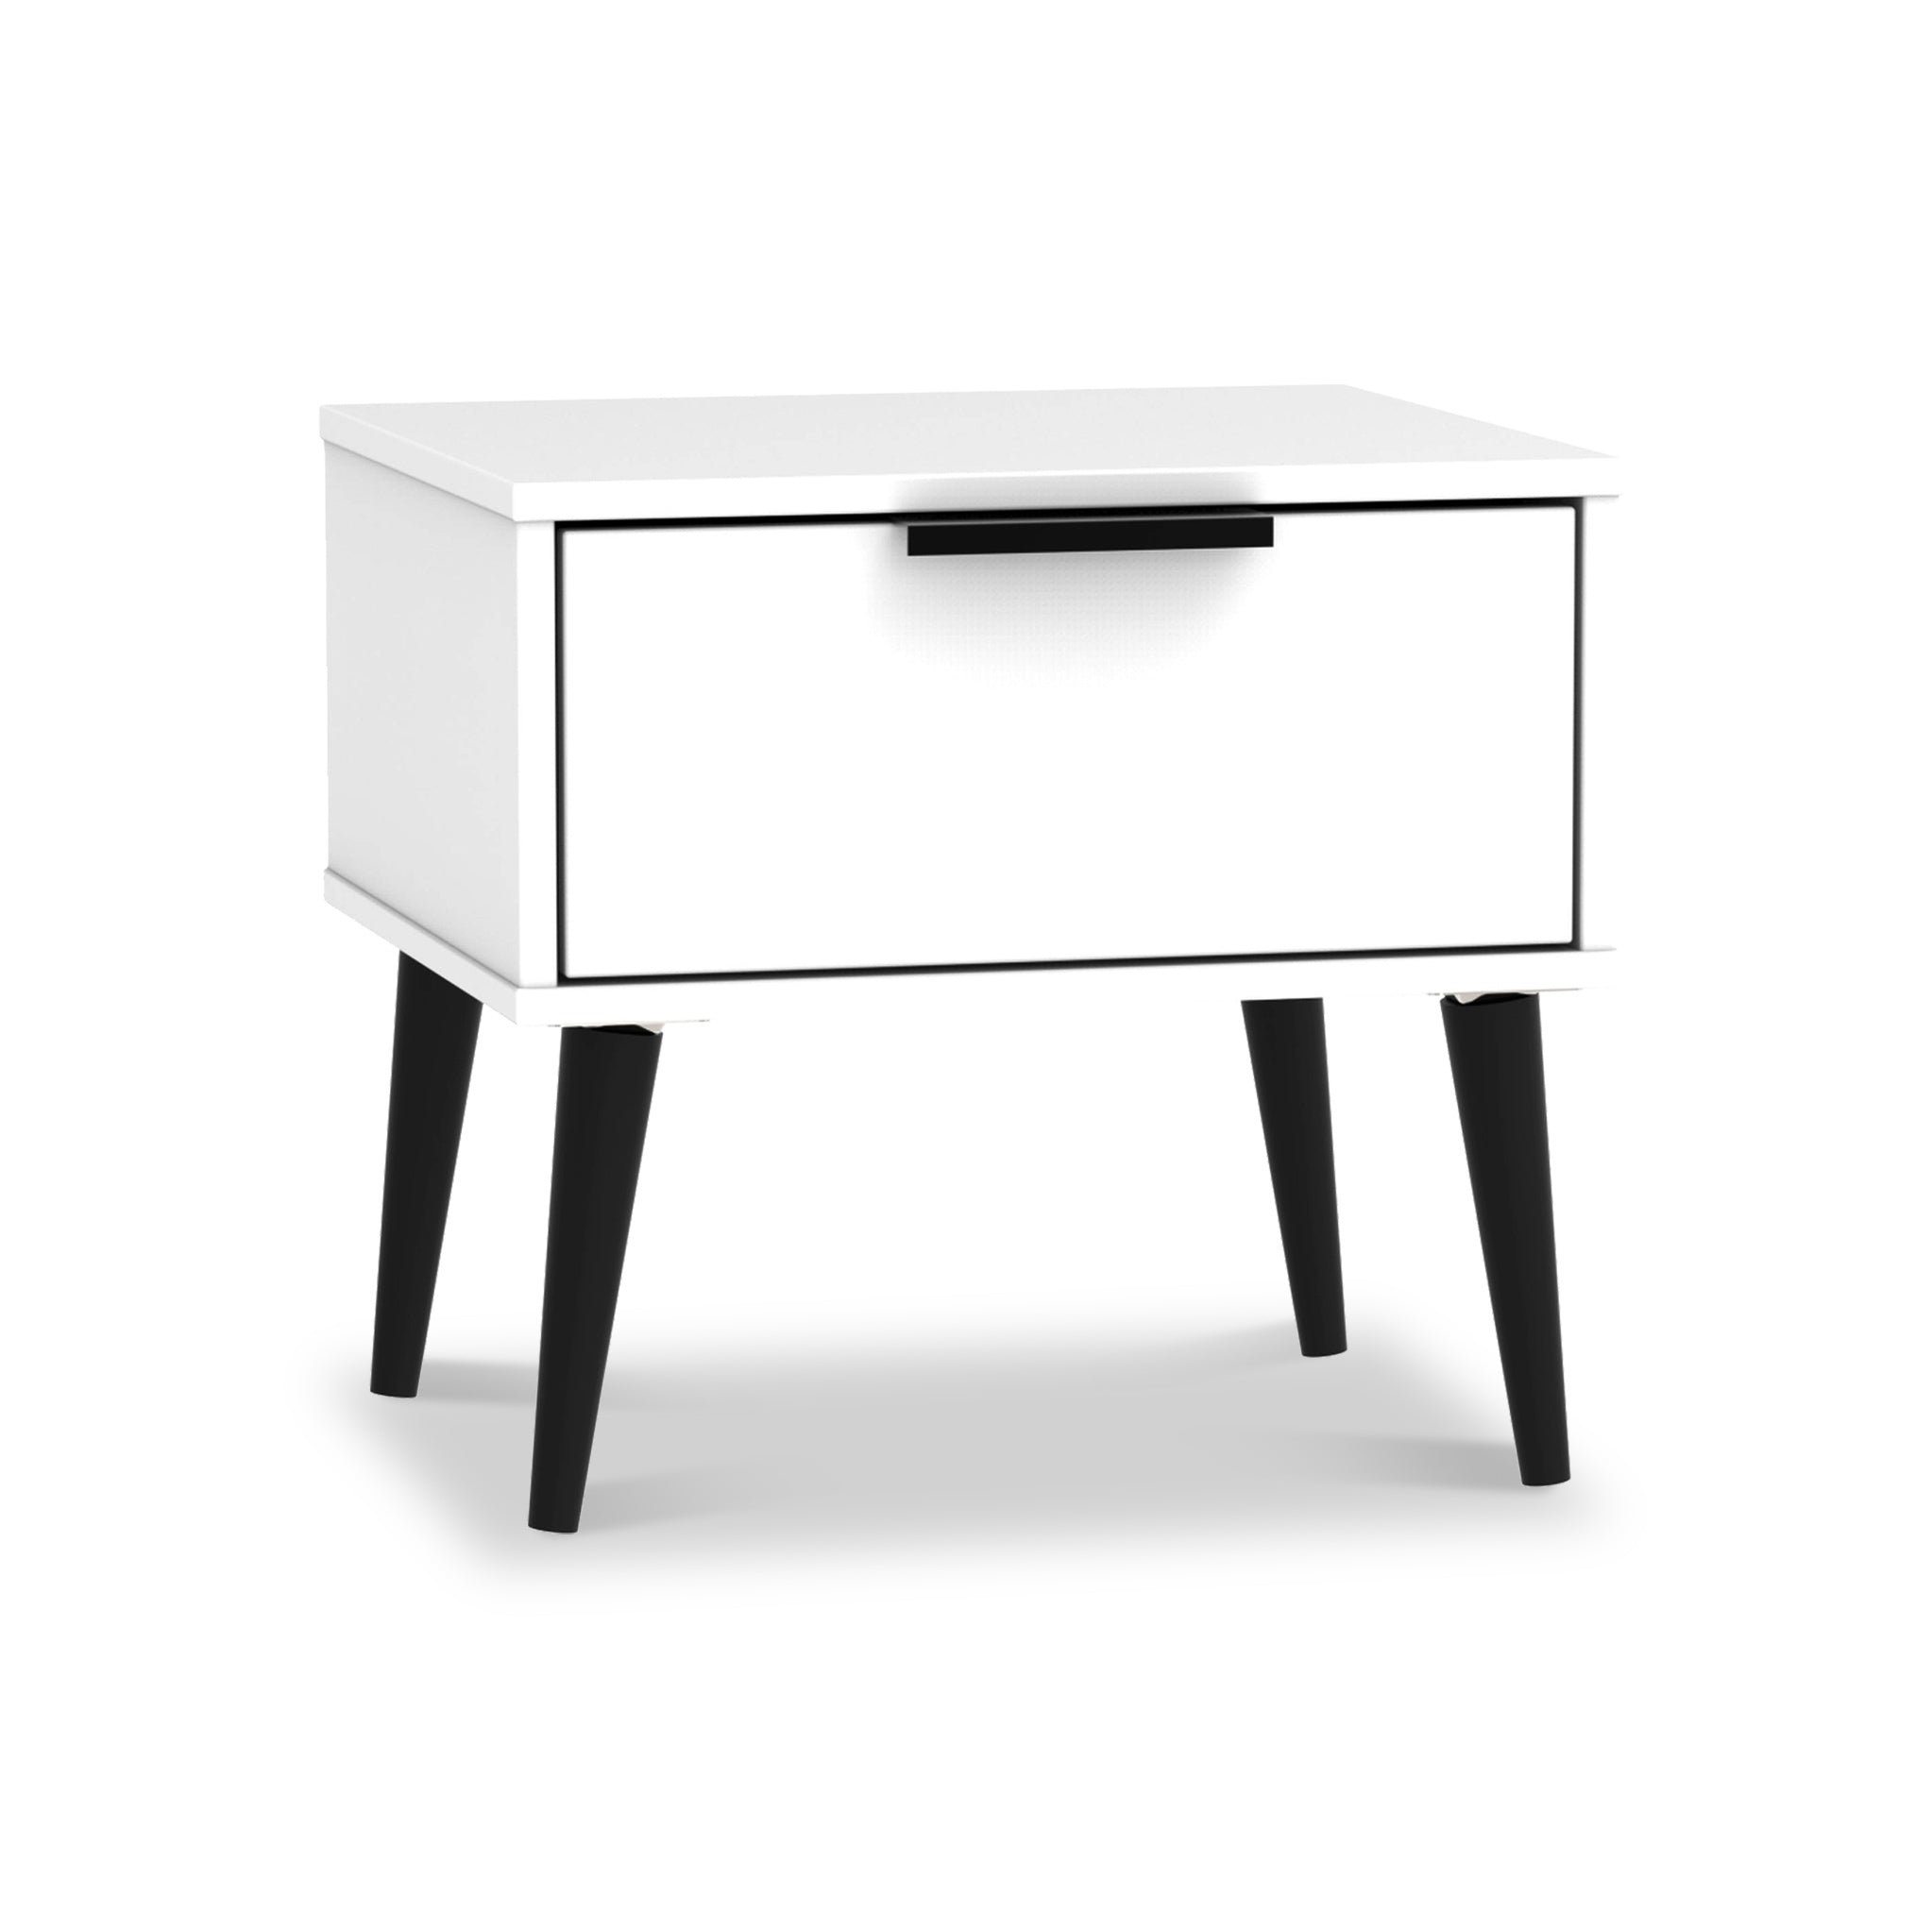 Asher White Wooden 1 Drawer Bedside Table With Black Legs Roseland